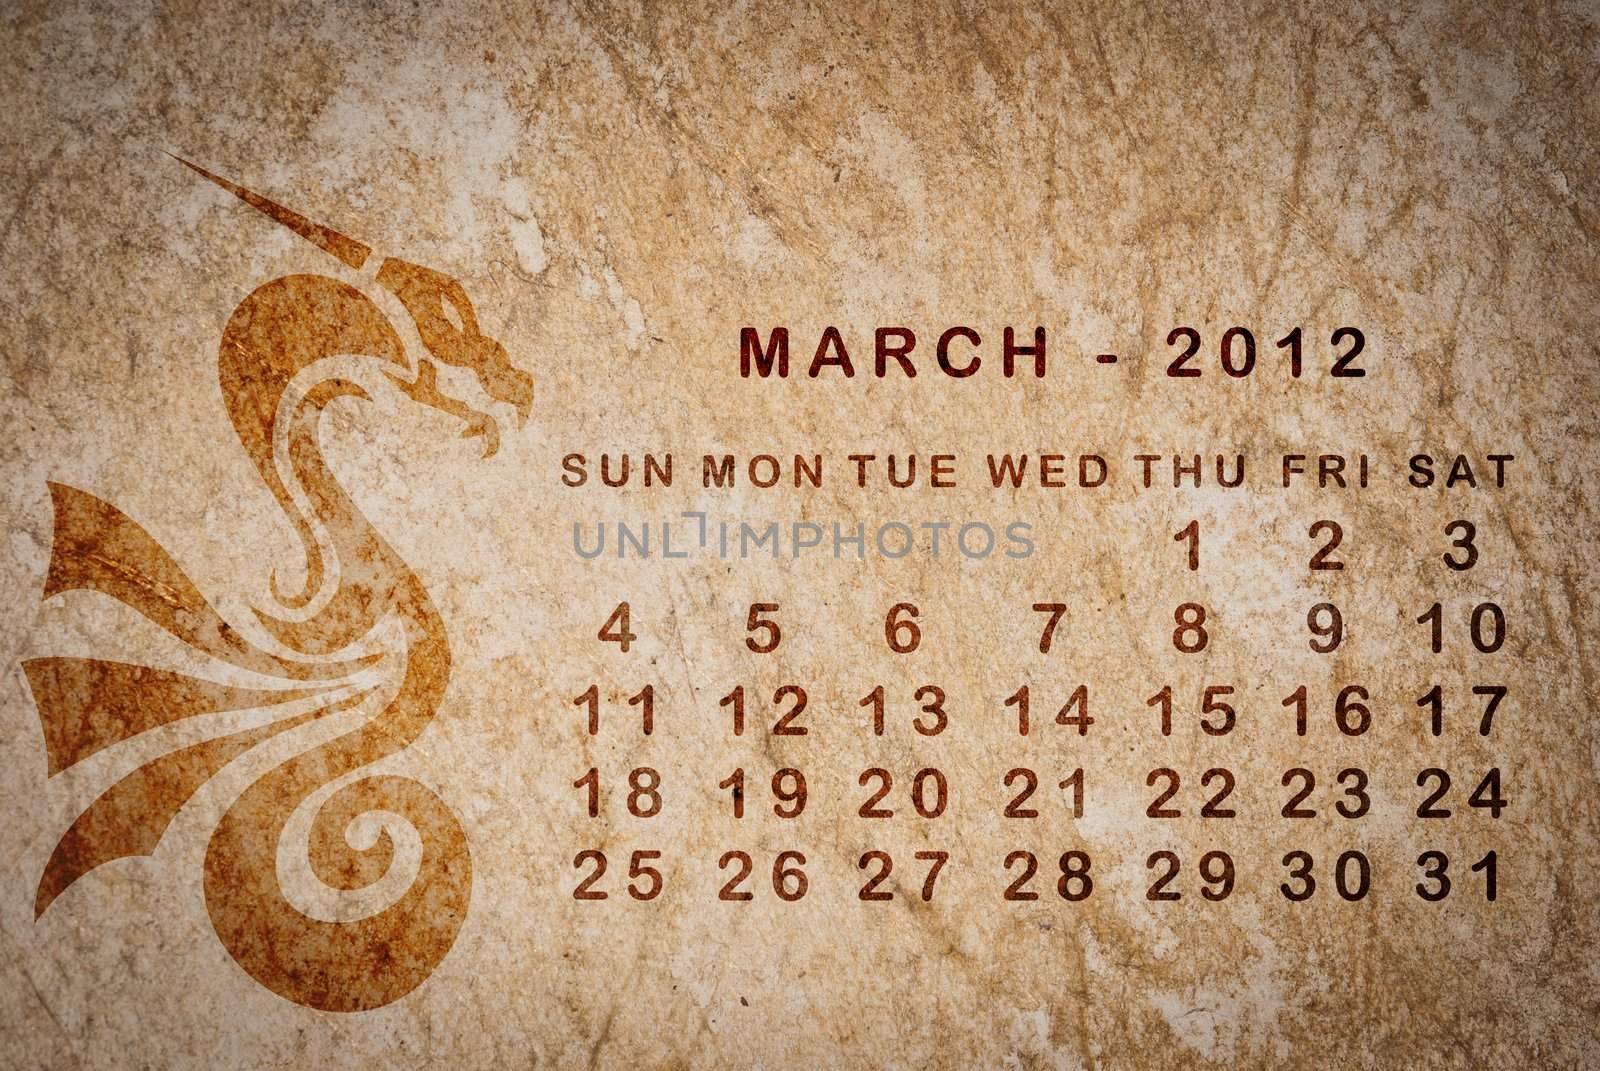 2012 year of the Dragon calendar on old vintage paper, March